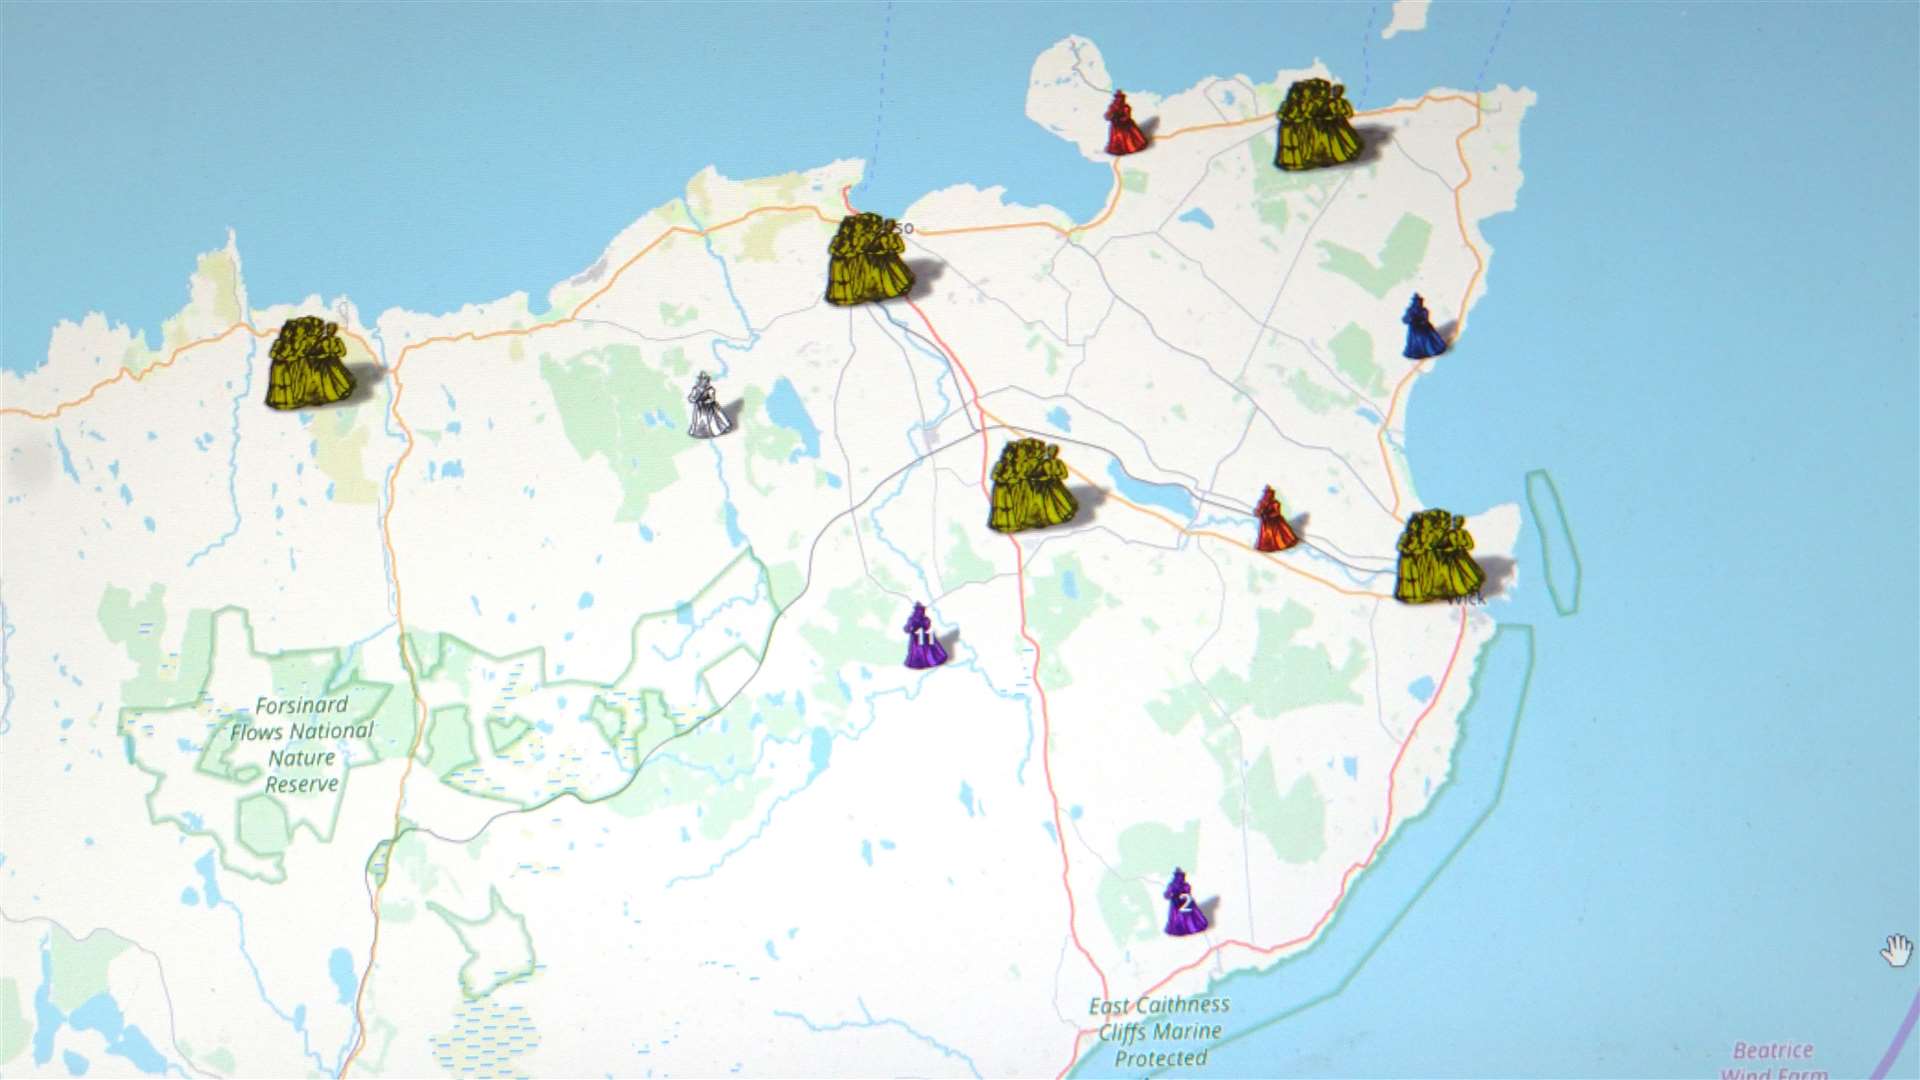 The research map by Edinburgh University academics show places in Caithness where people were accused of witchcraft.